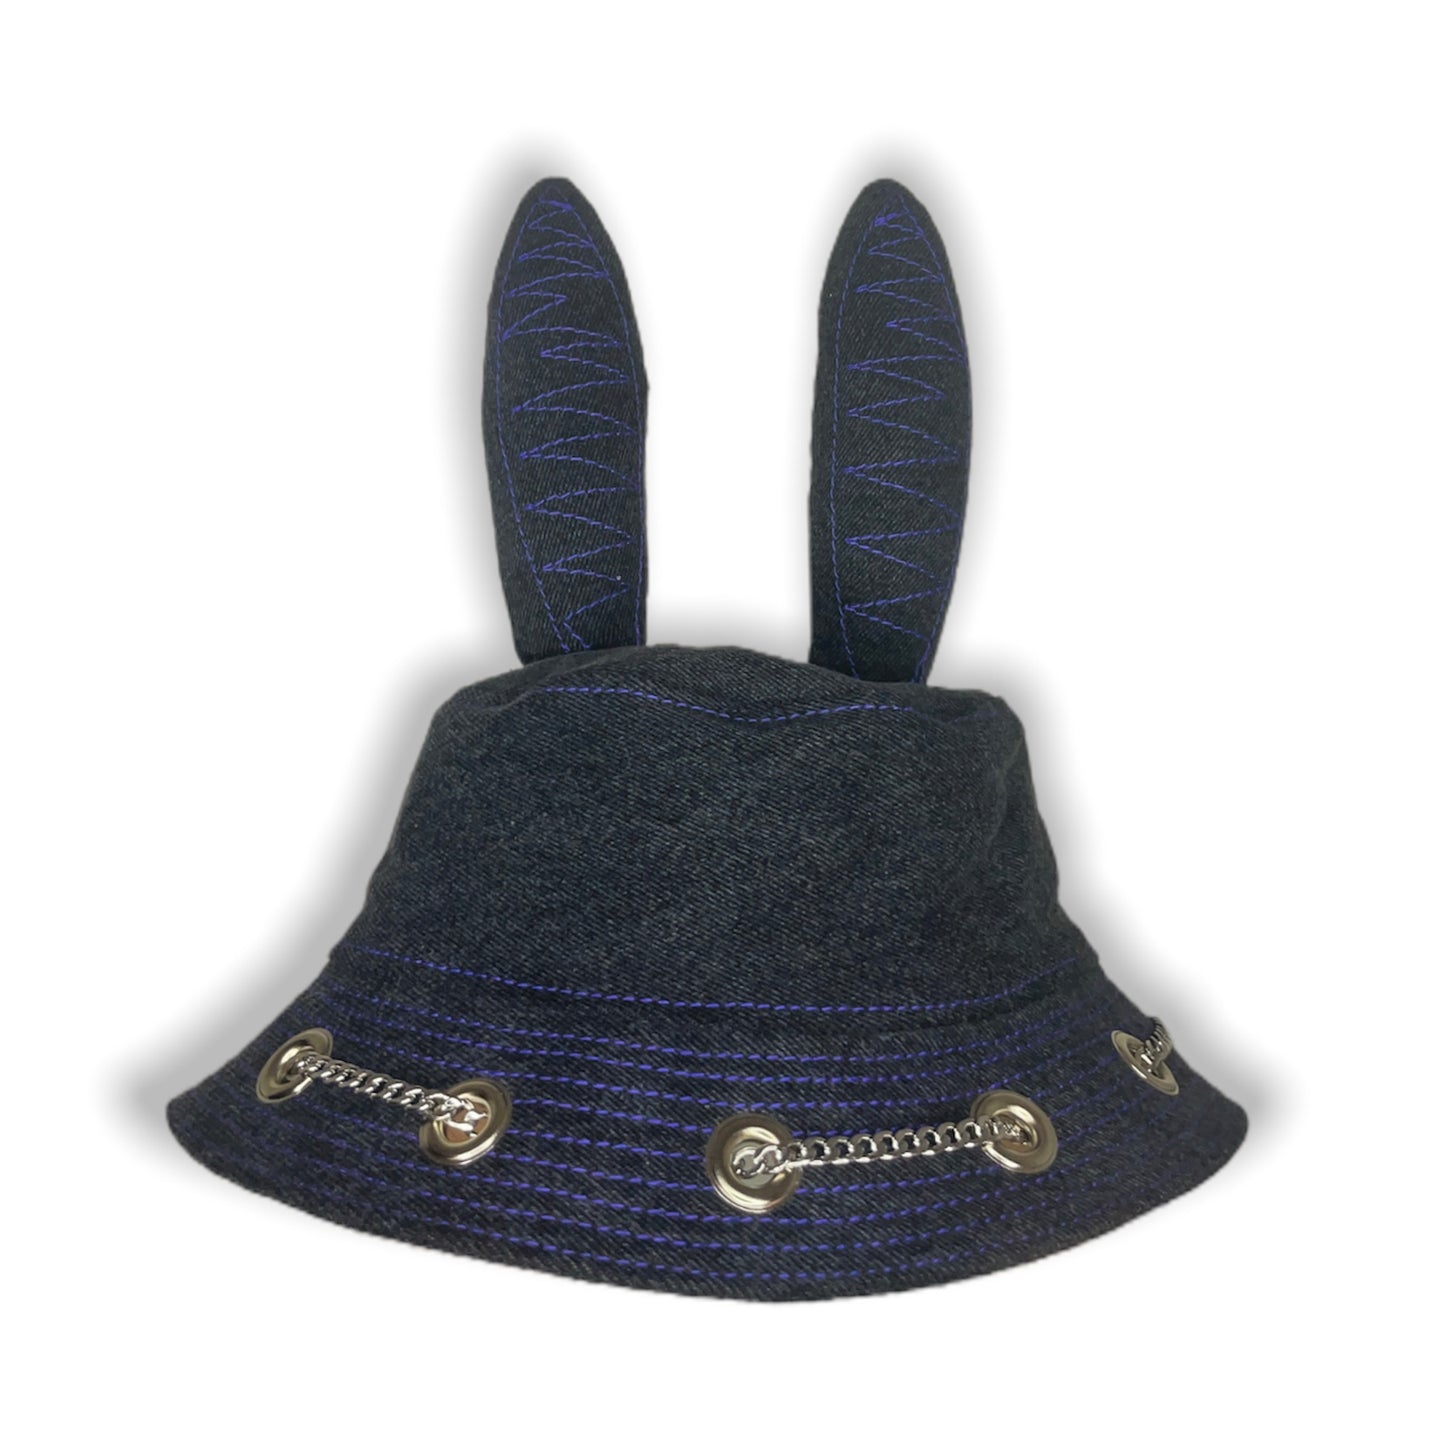 Grey and Purple Bunny Hat 1of1